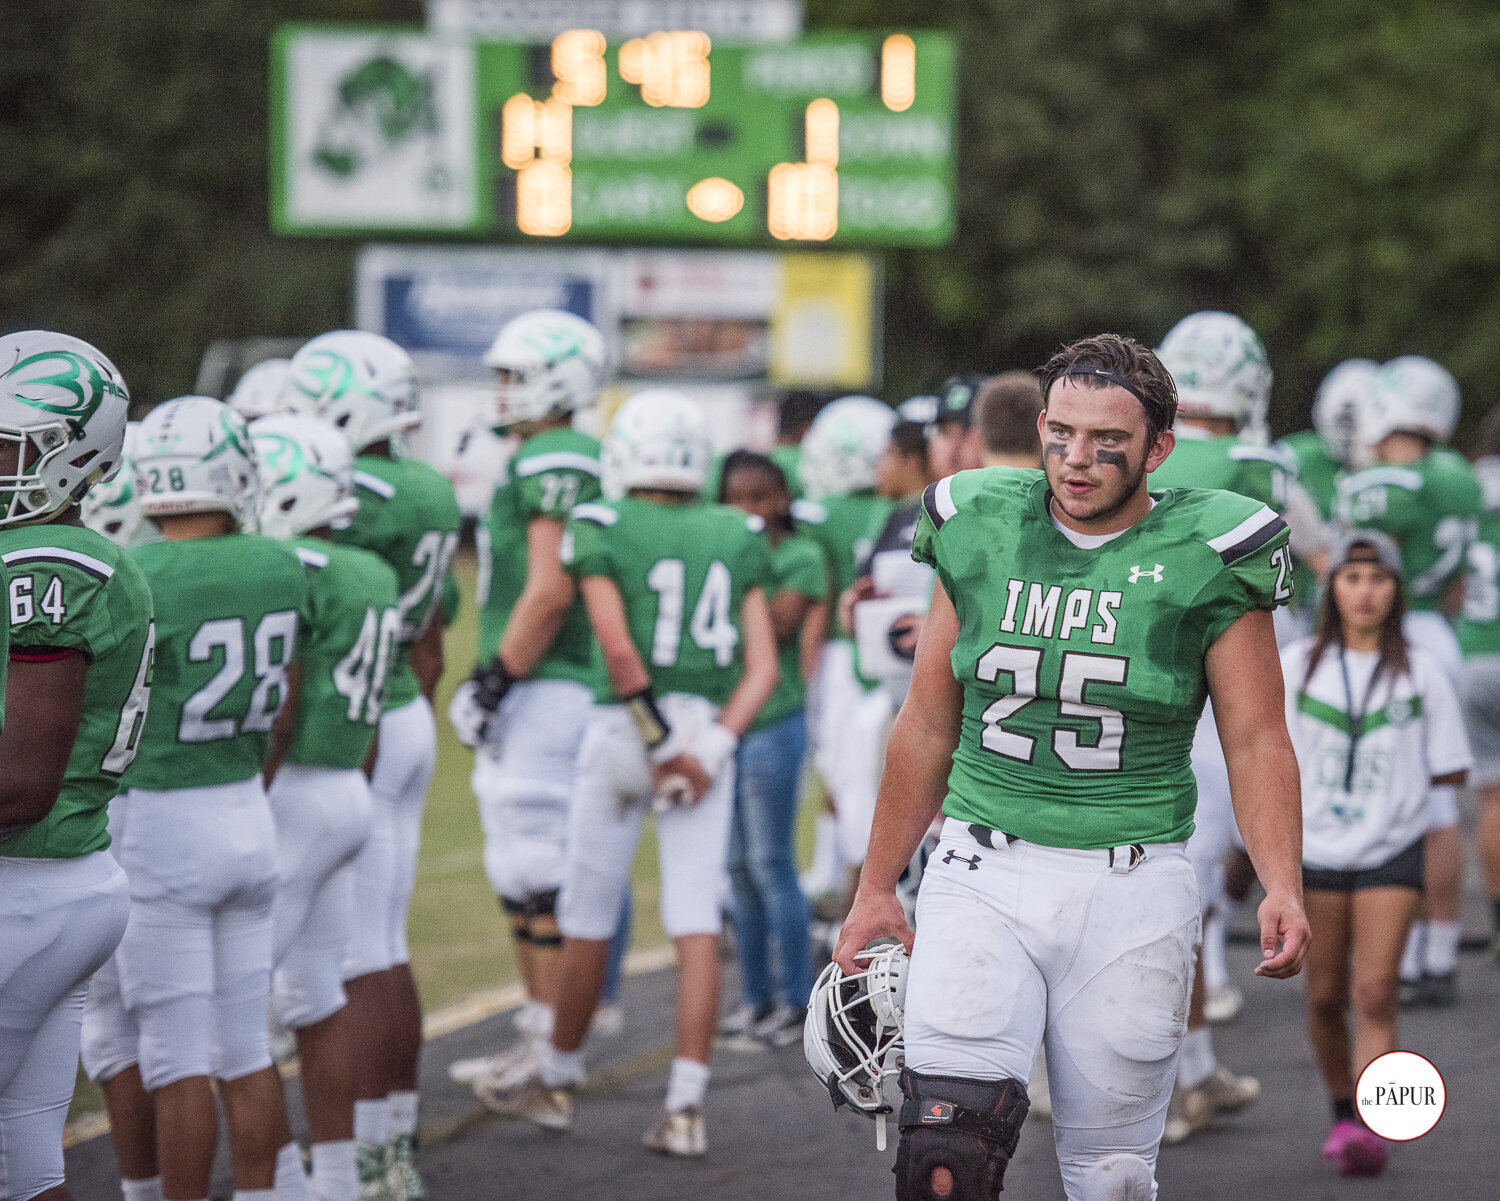 Cary High School Football Game, at Home, Versus Holly Springs [PHOTOS